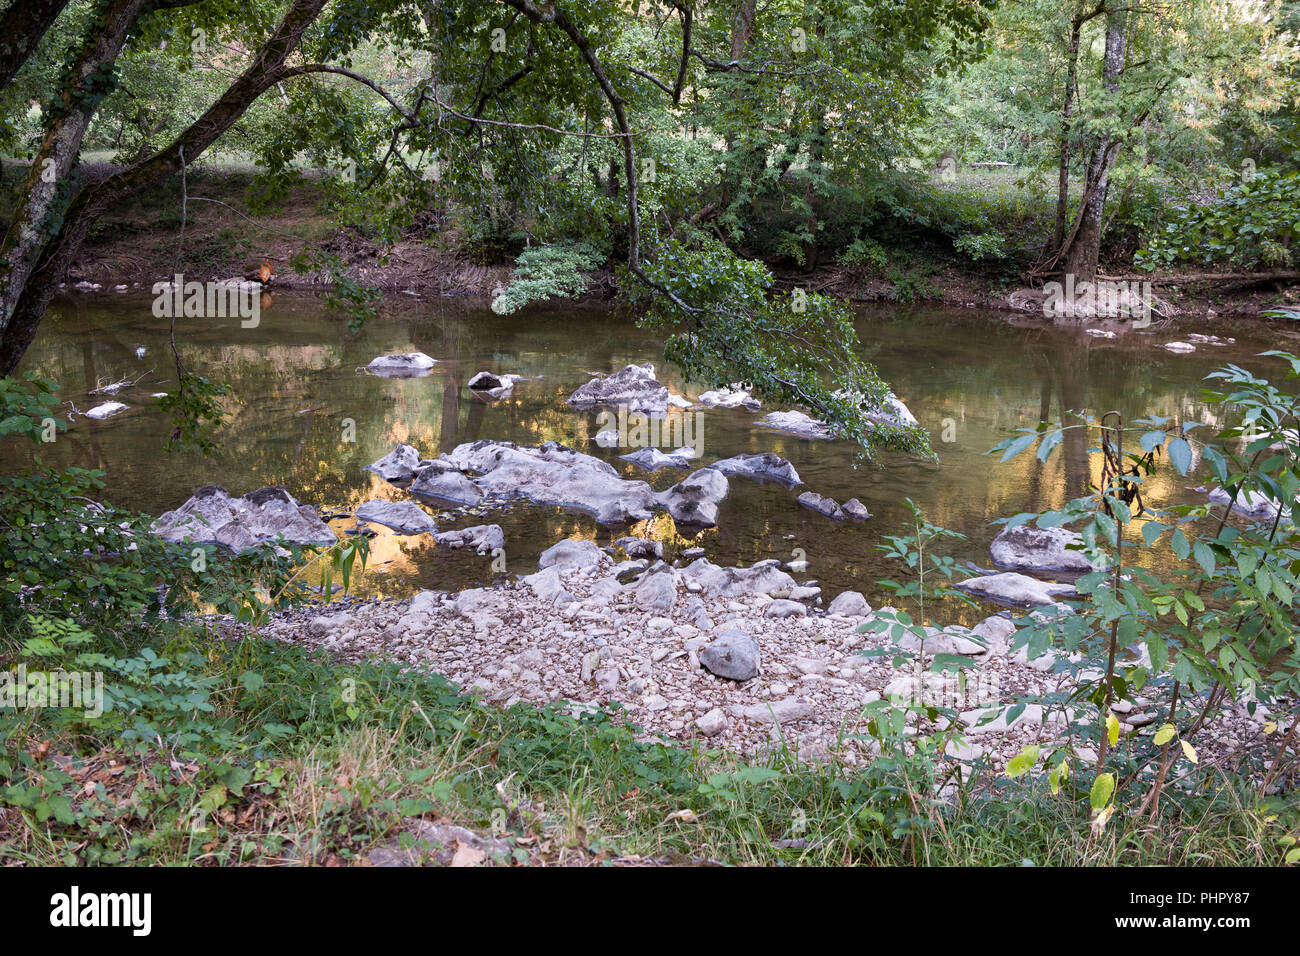 Rocks uncovered on be riverbed of the Aveyron river after a long drought in Laguépie, Tarn et Garonne, Occitanie, France at the beginning of September Stock Photo